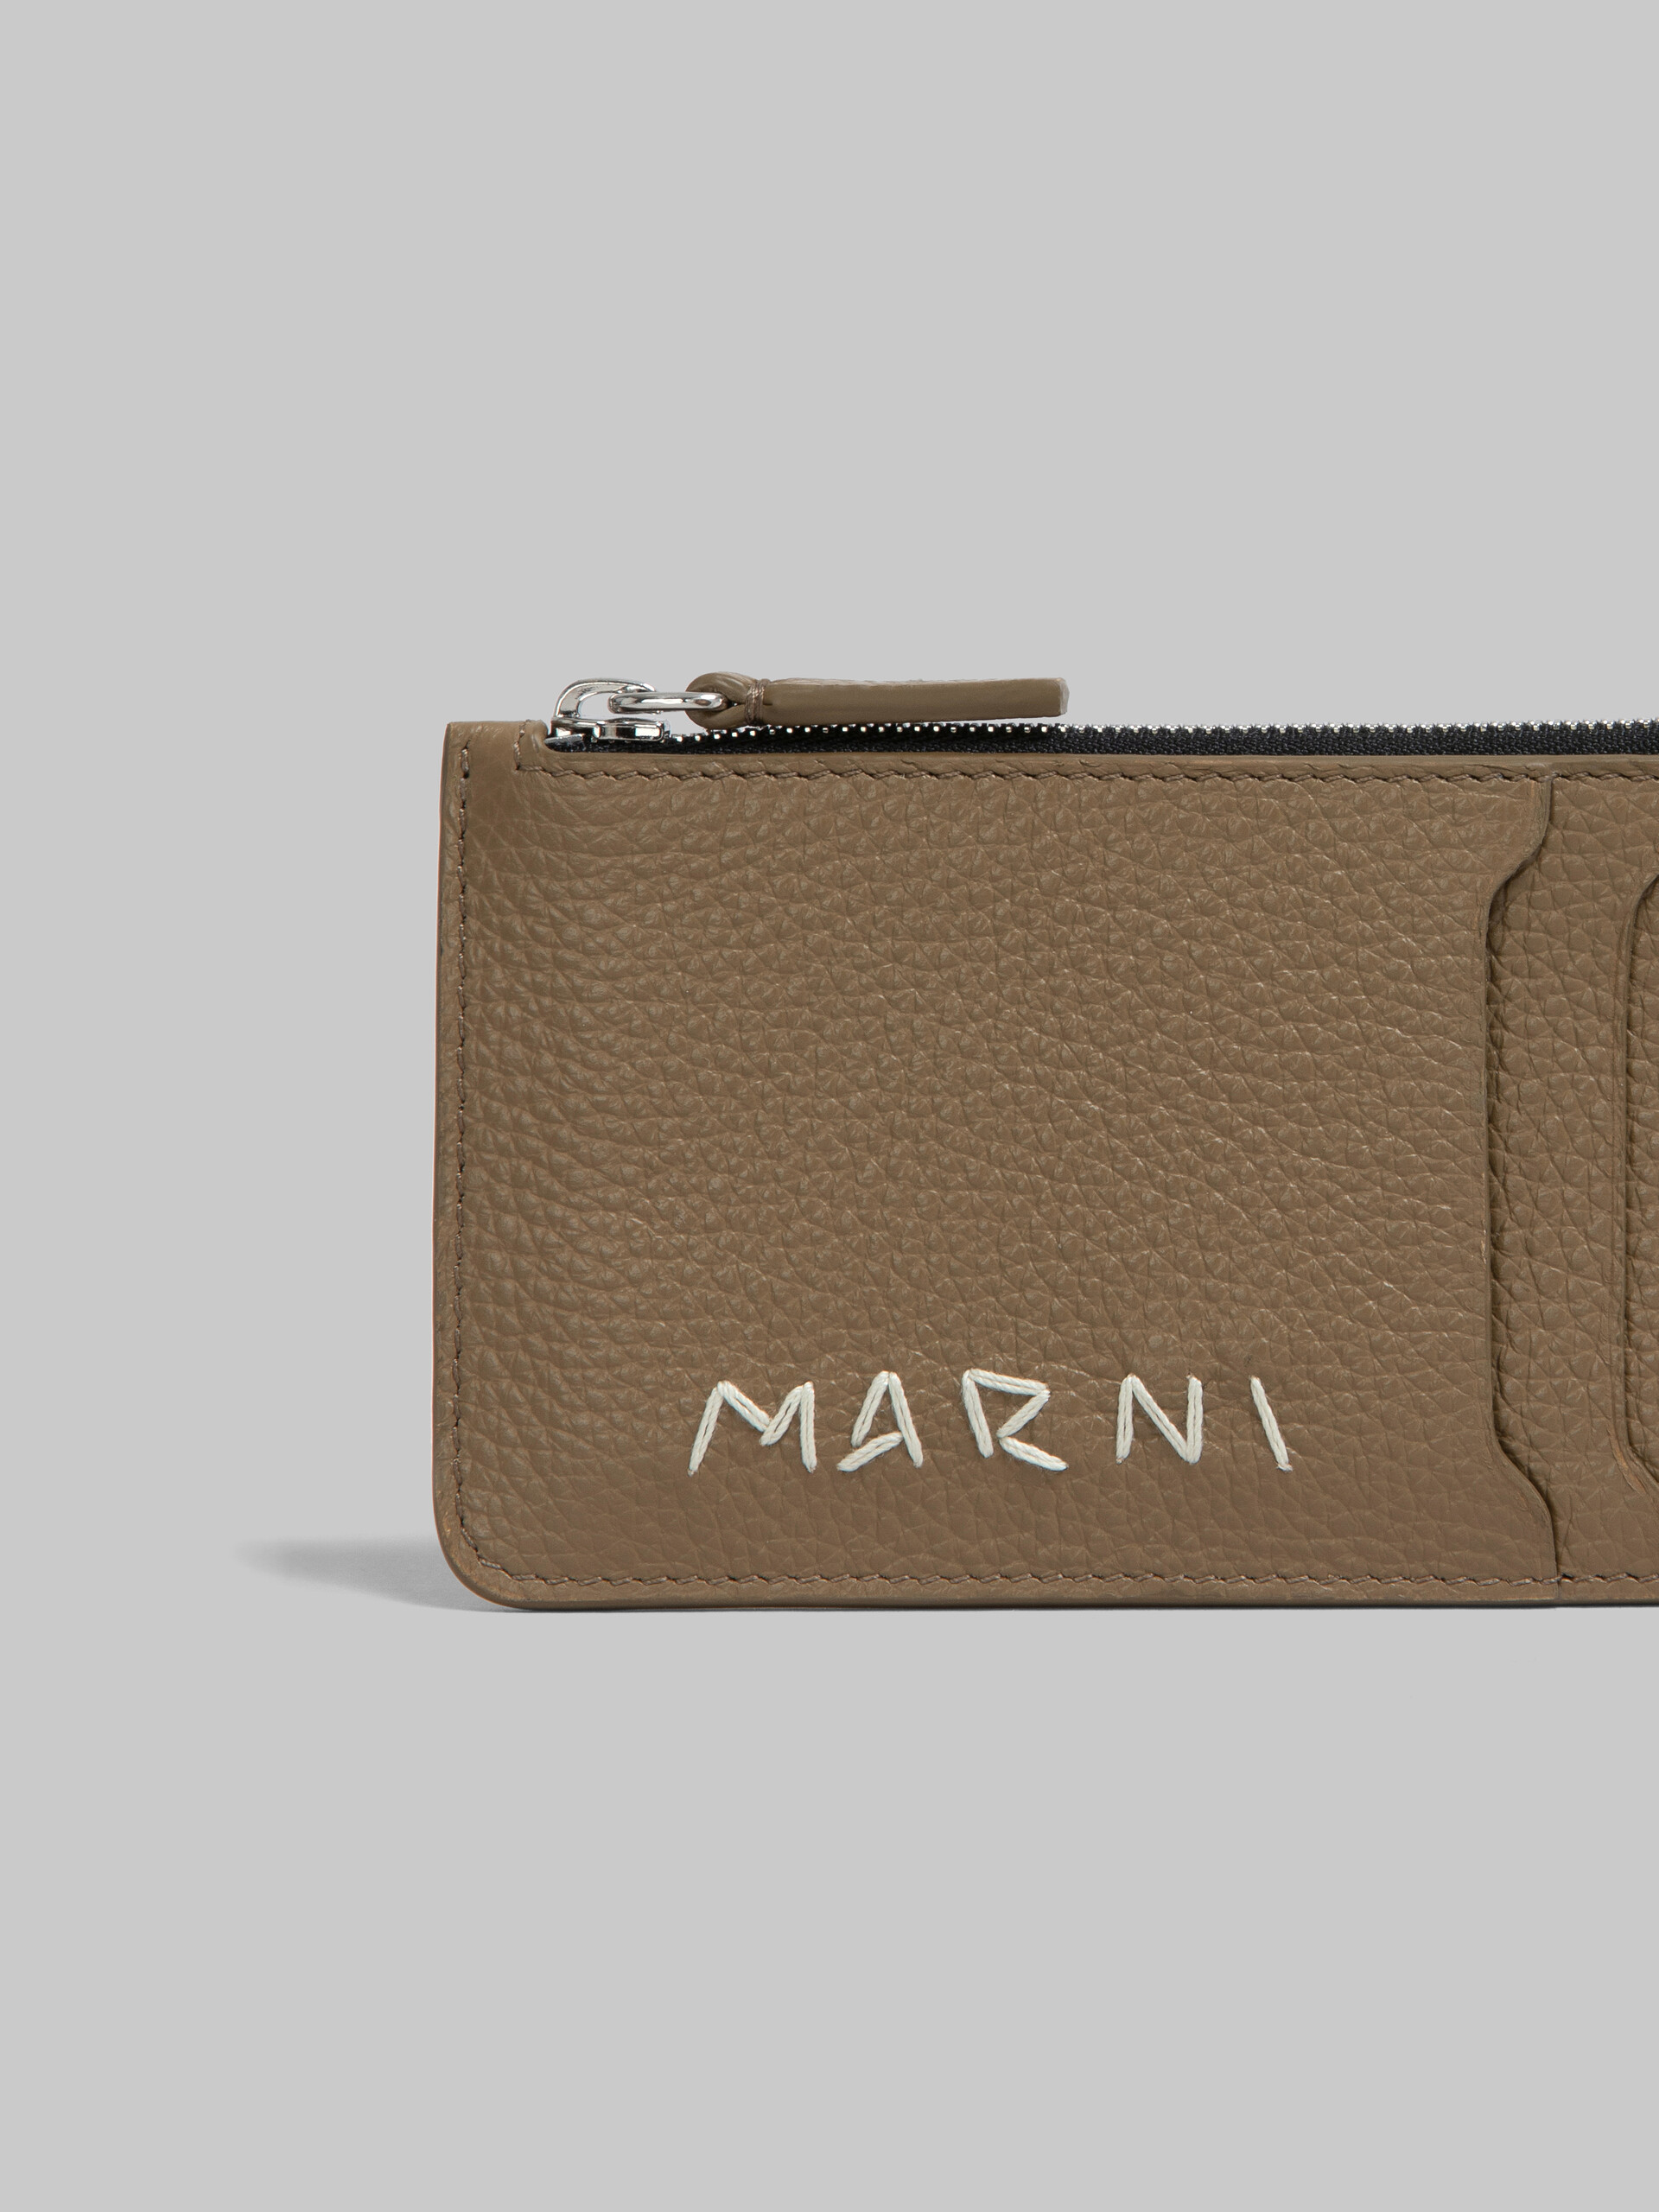 Black leather card case with Marni mending - Wallets - Image 4